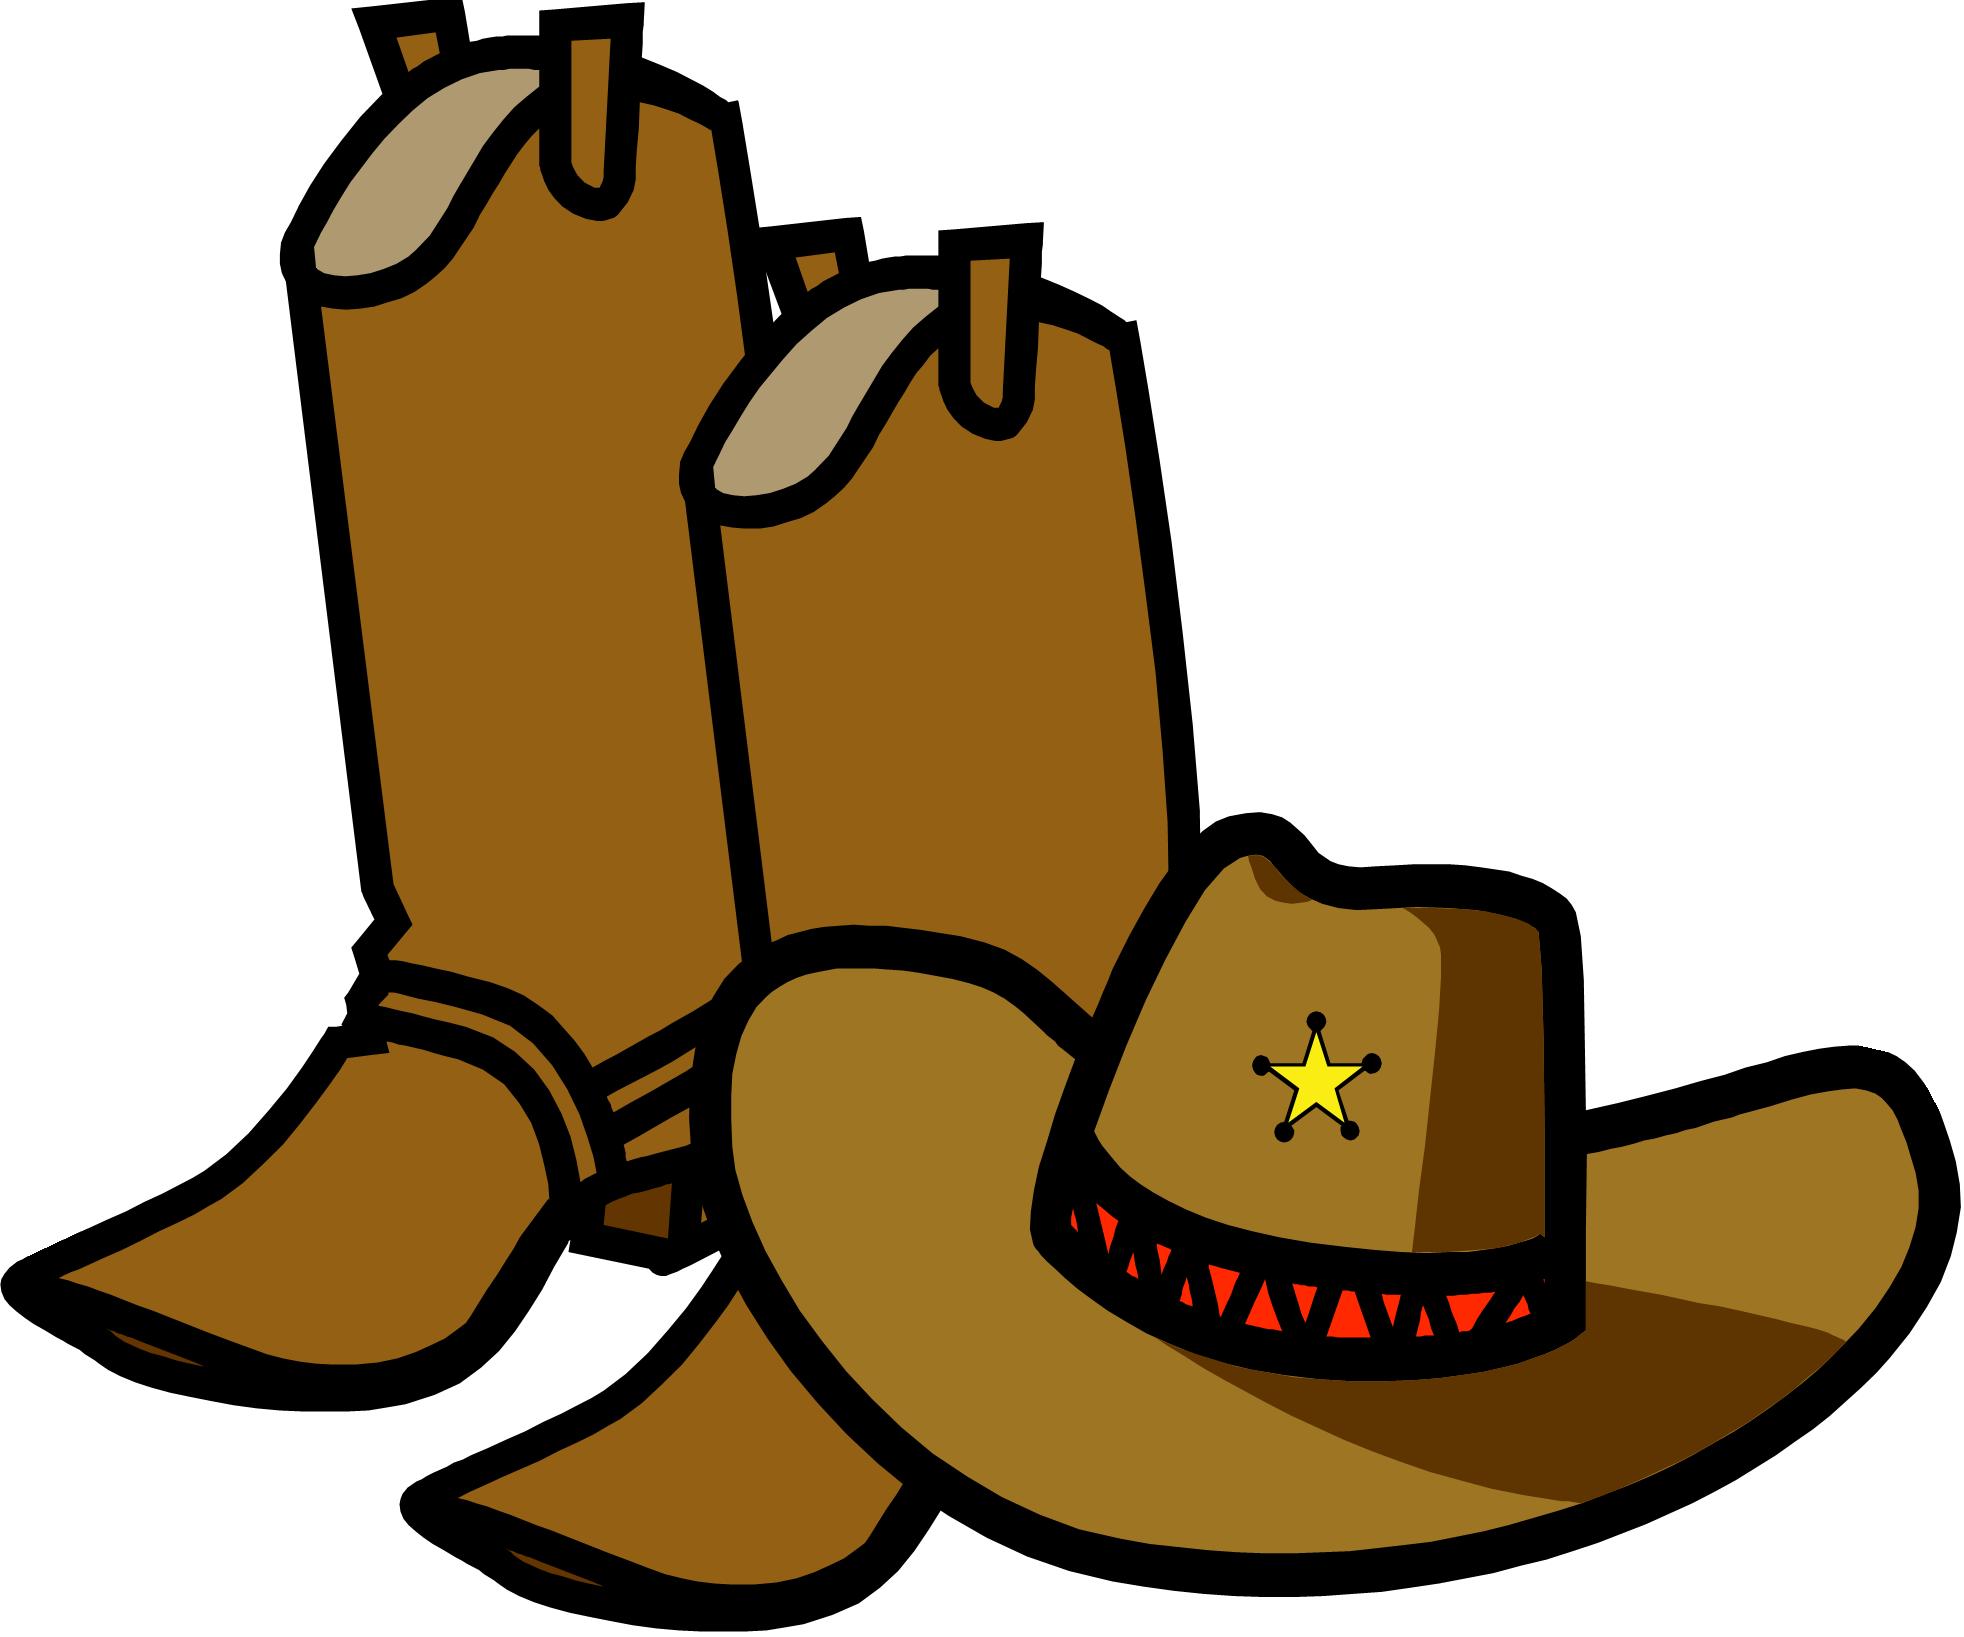 Cartoon Cowboy Boots - Cliparts and Others Art Inspiration